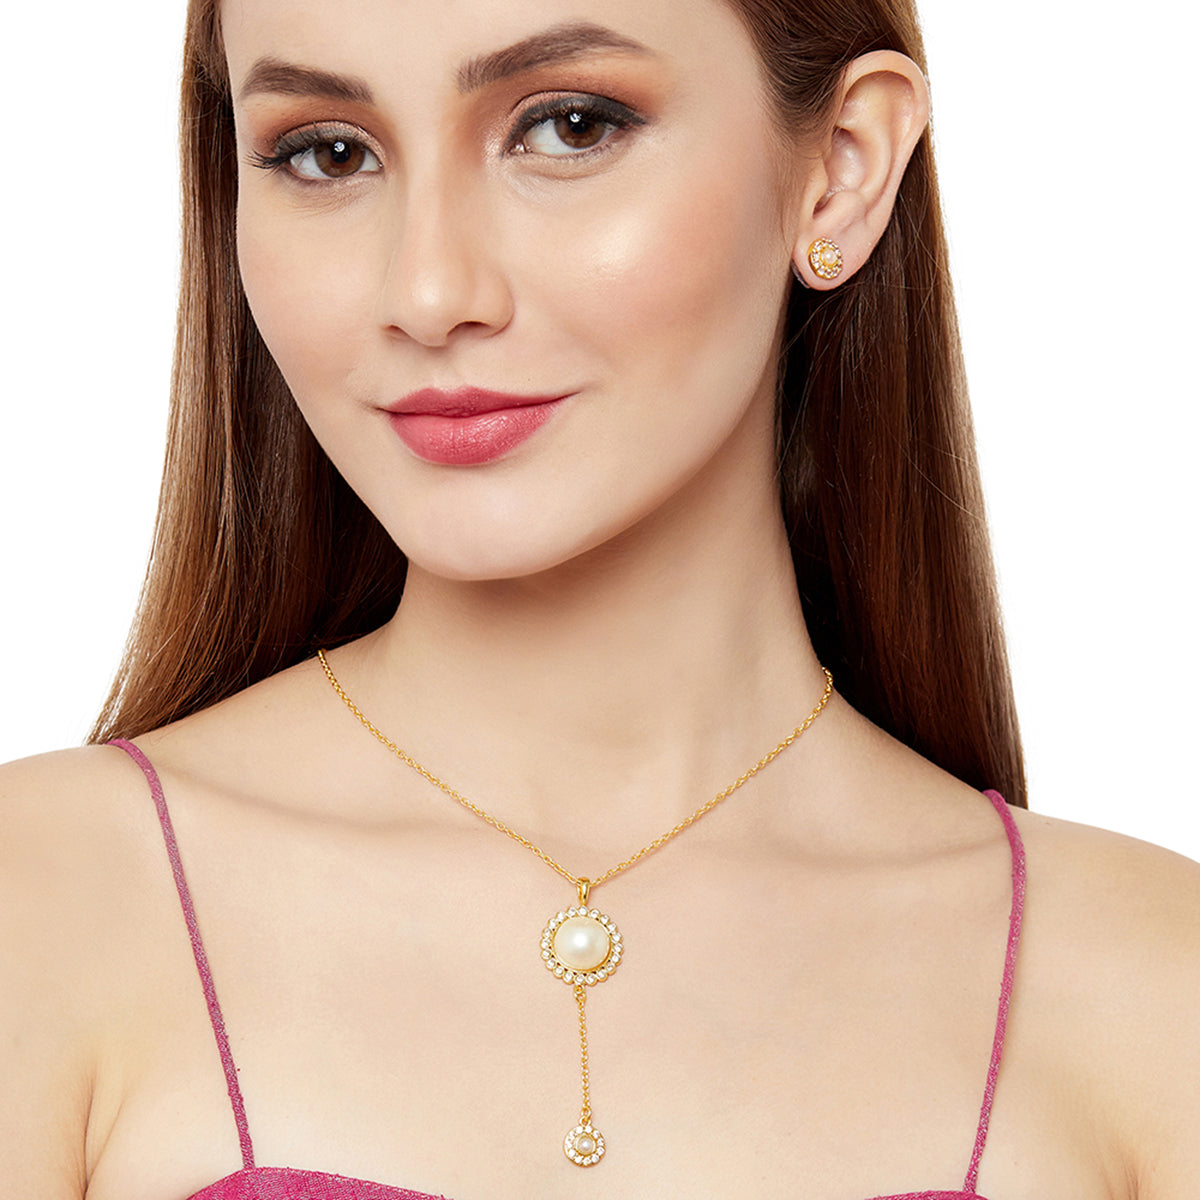 Buy Parisaa Chain Pendant Necklace | Charm Necklace | Beaded Chain Pendant  | Flower/Coin/Heart Charm (ONLY 1 PIECE) (Colour Pop Coin Charm, 14 inches)  at Amazon.in